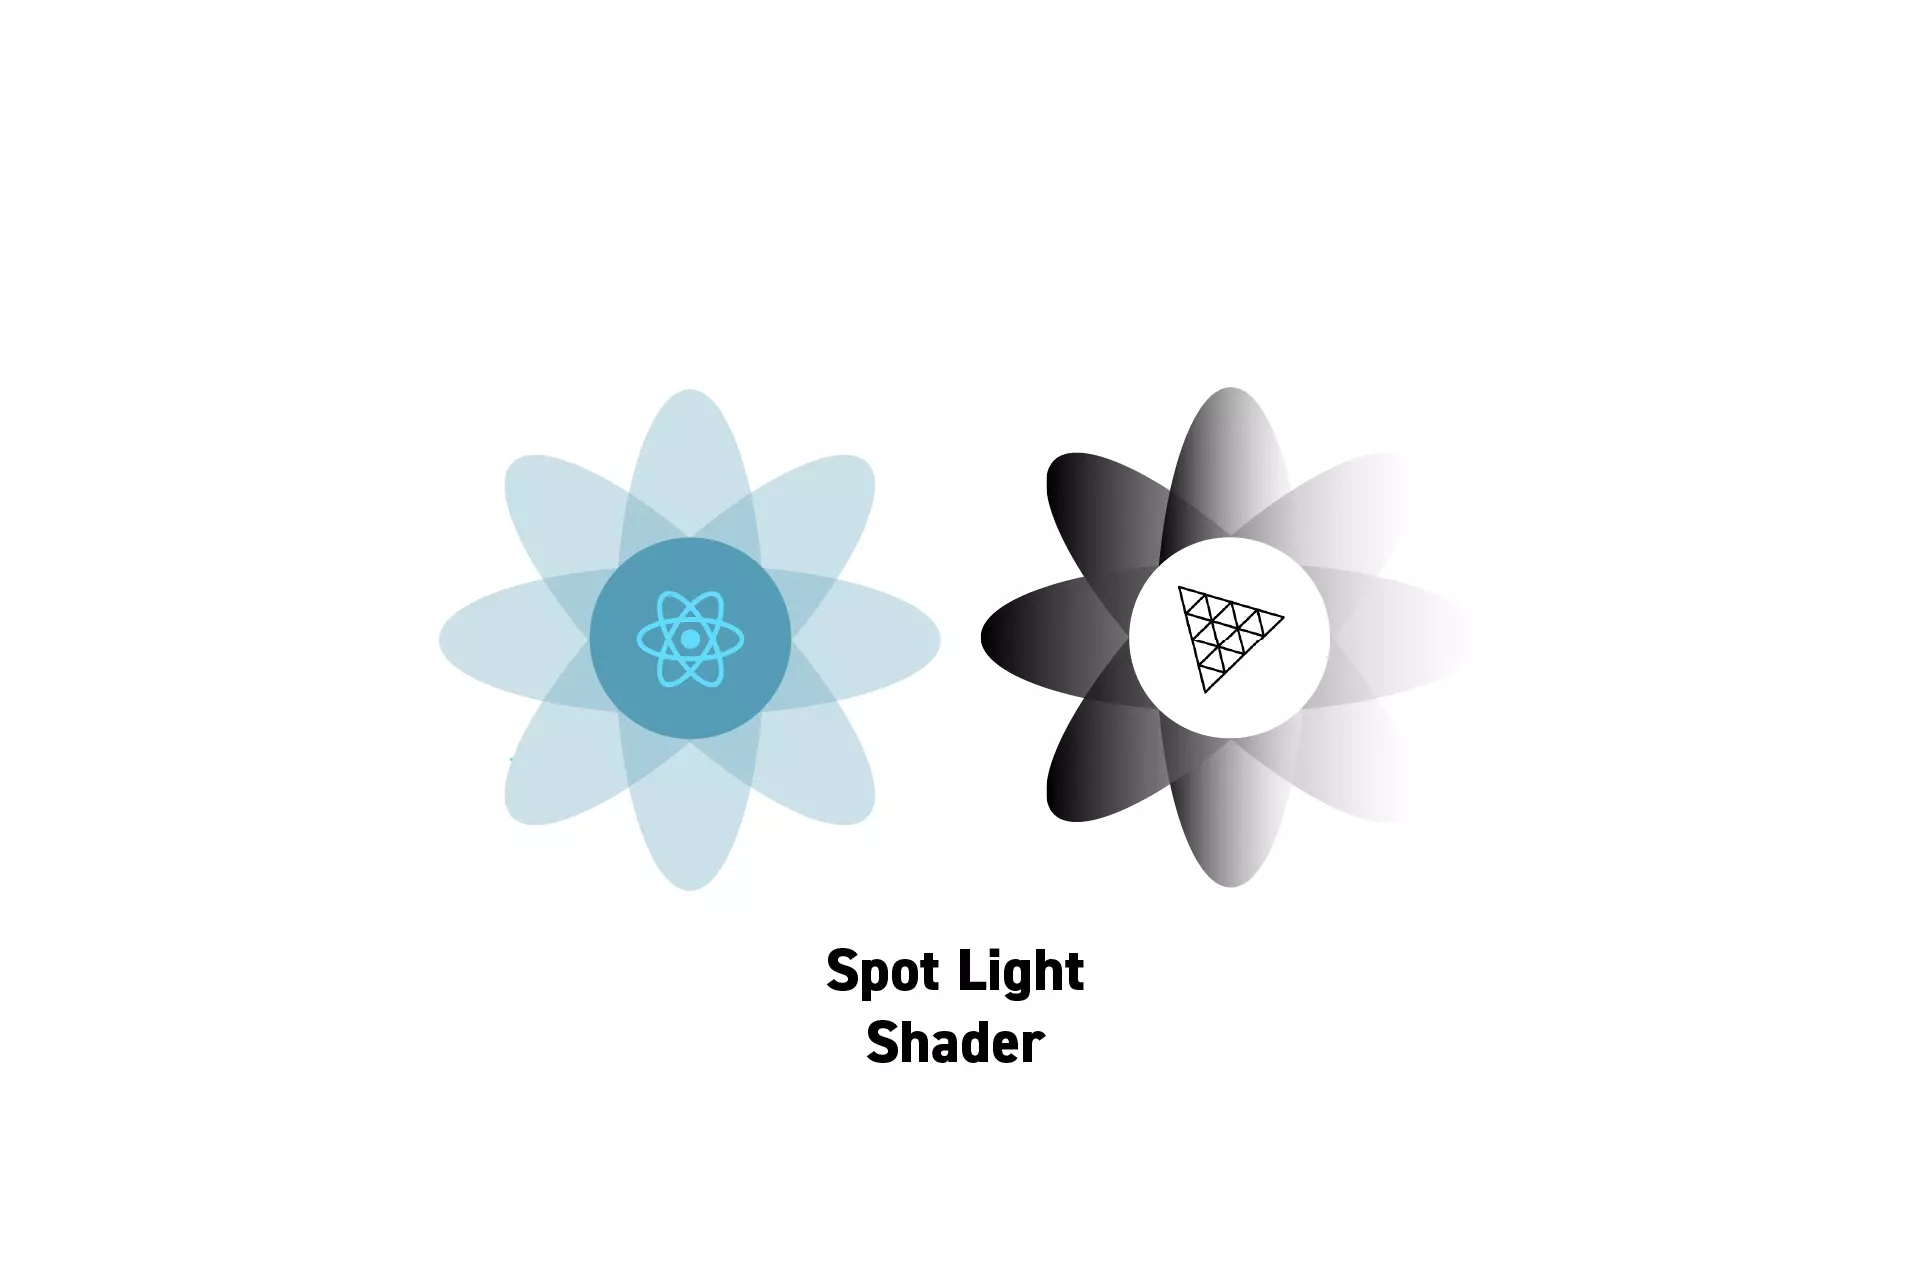 Two flowers that represent ReactJS and ThreeJS with the text "Spot Light Shader" beneath them.